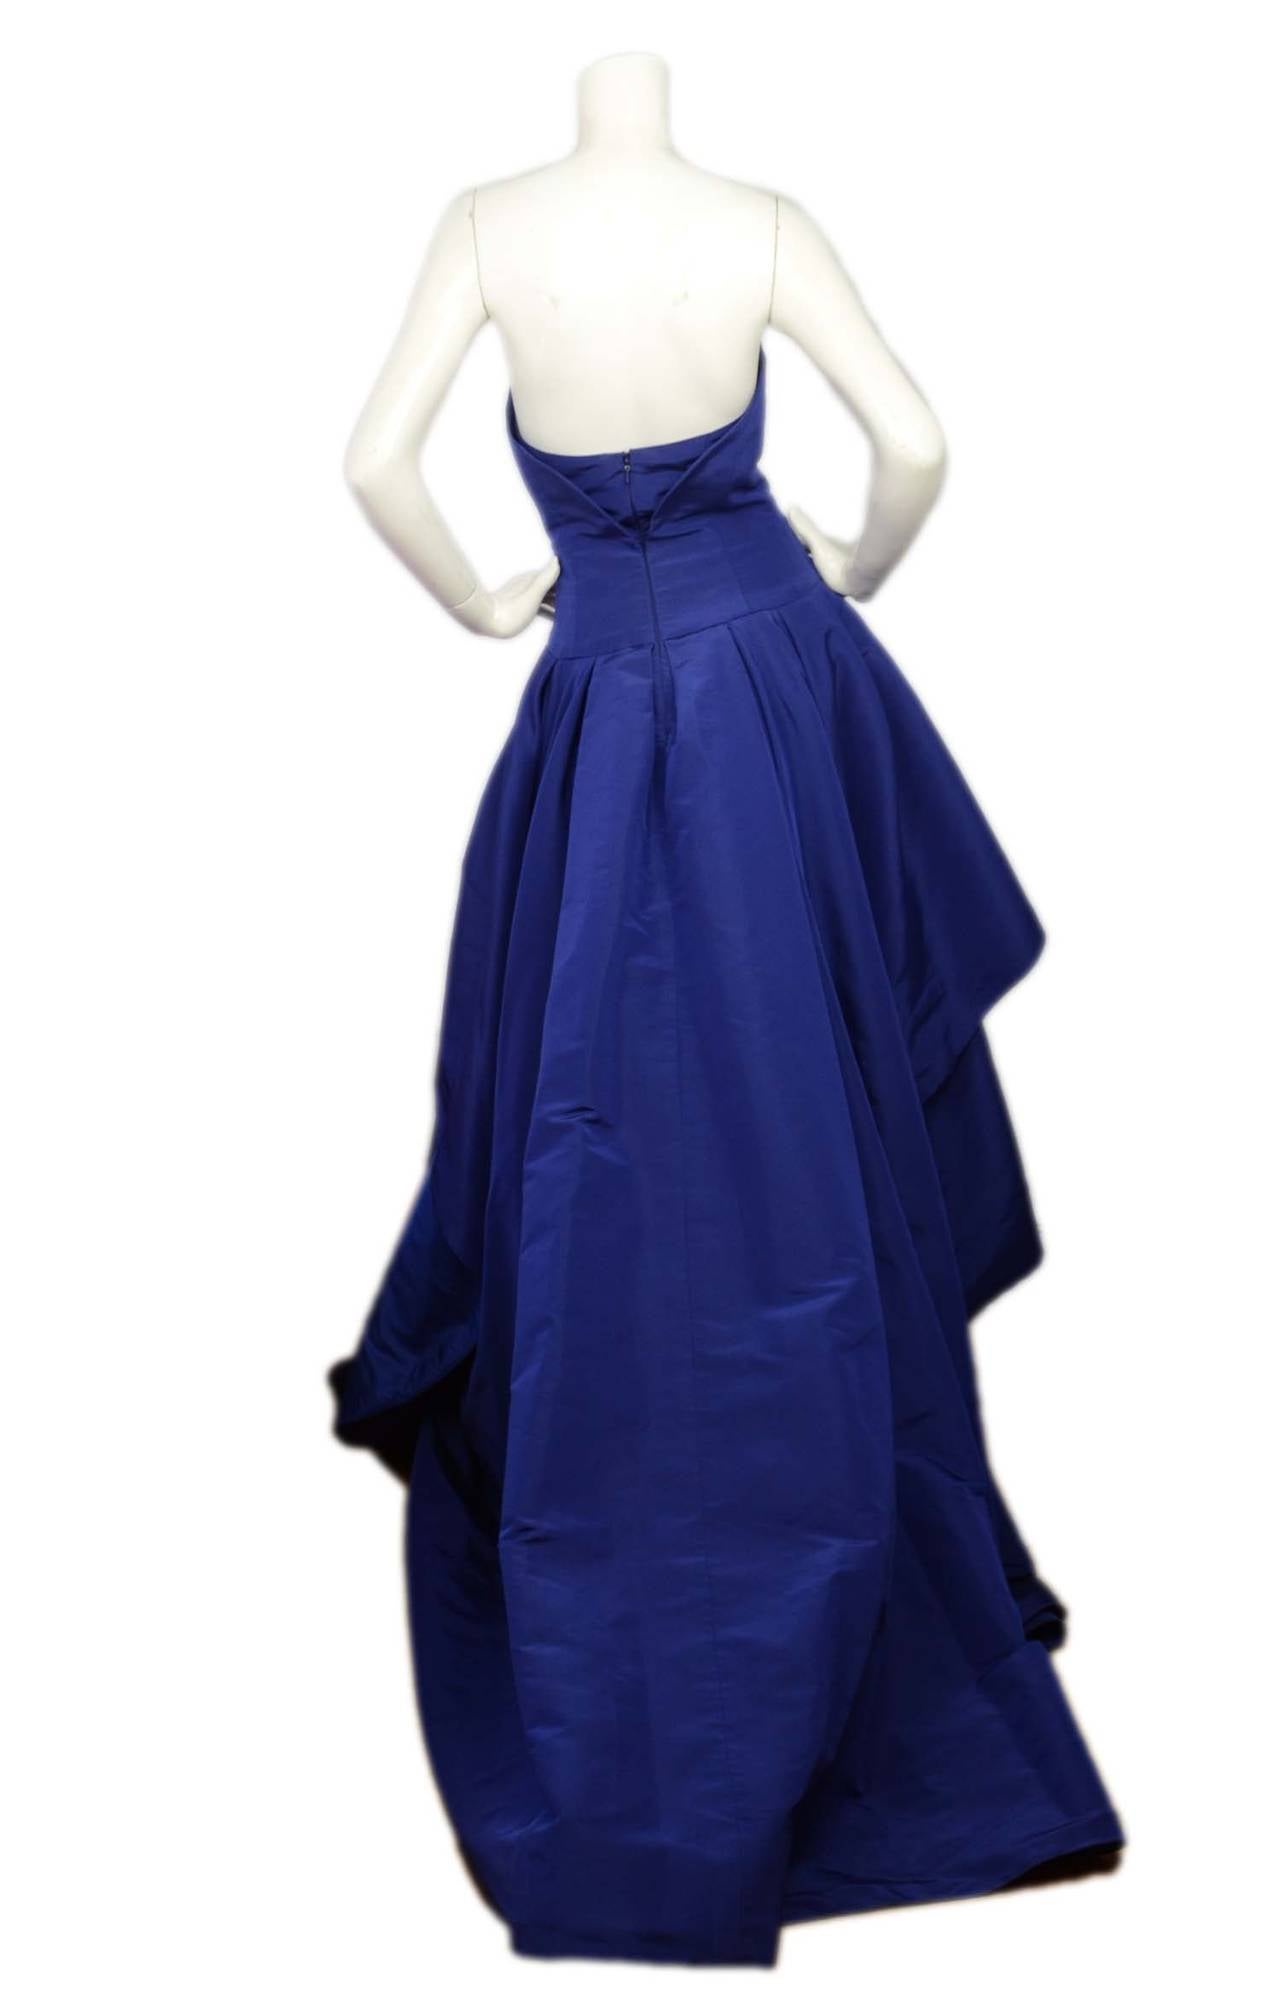 Features built in corset

-Color: Cobalt blue
-Composition: No composition break down- believed to be raw silk
-Tags: Oscar de la Renta
-Lining: 100% silk
-Closure/opening: Two back zippers- one at corset
-Exterior Pockets: None
-Interior